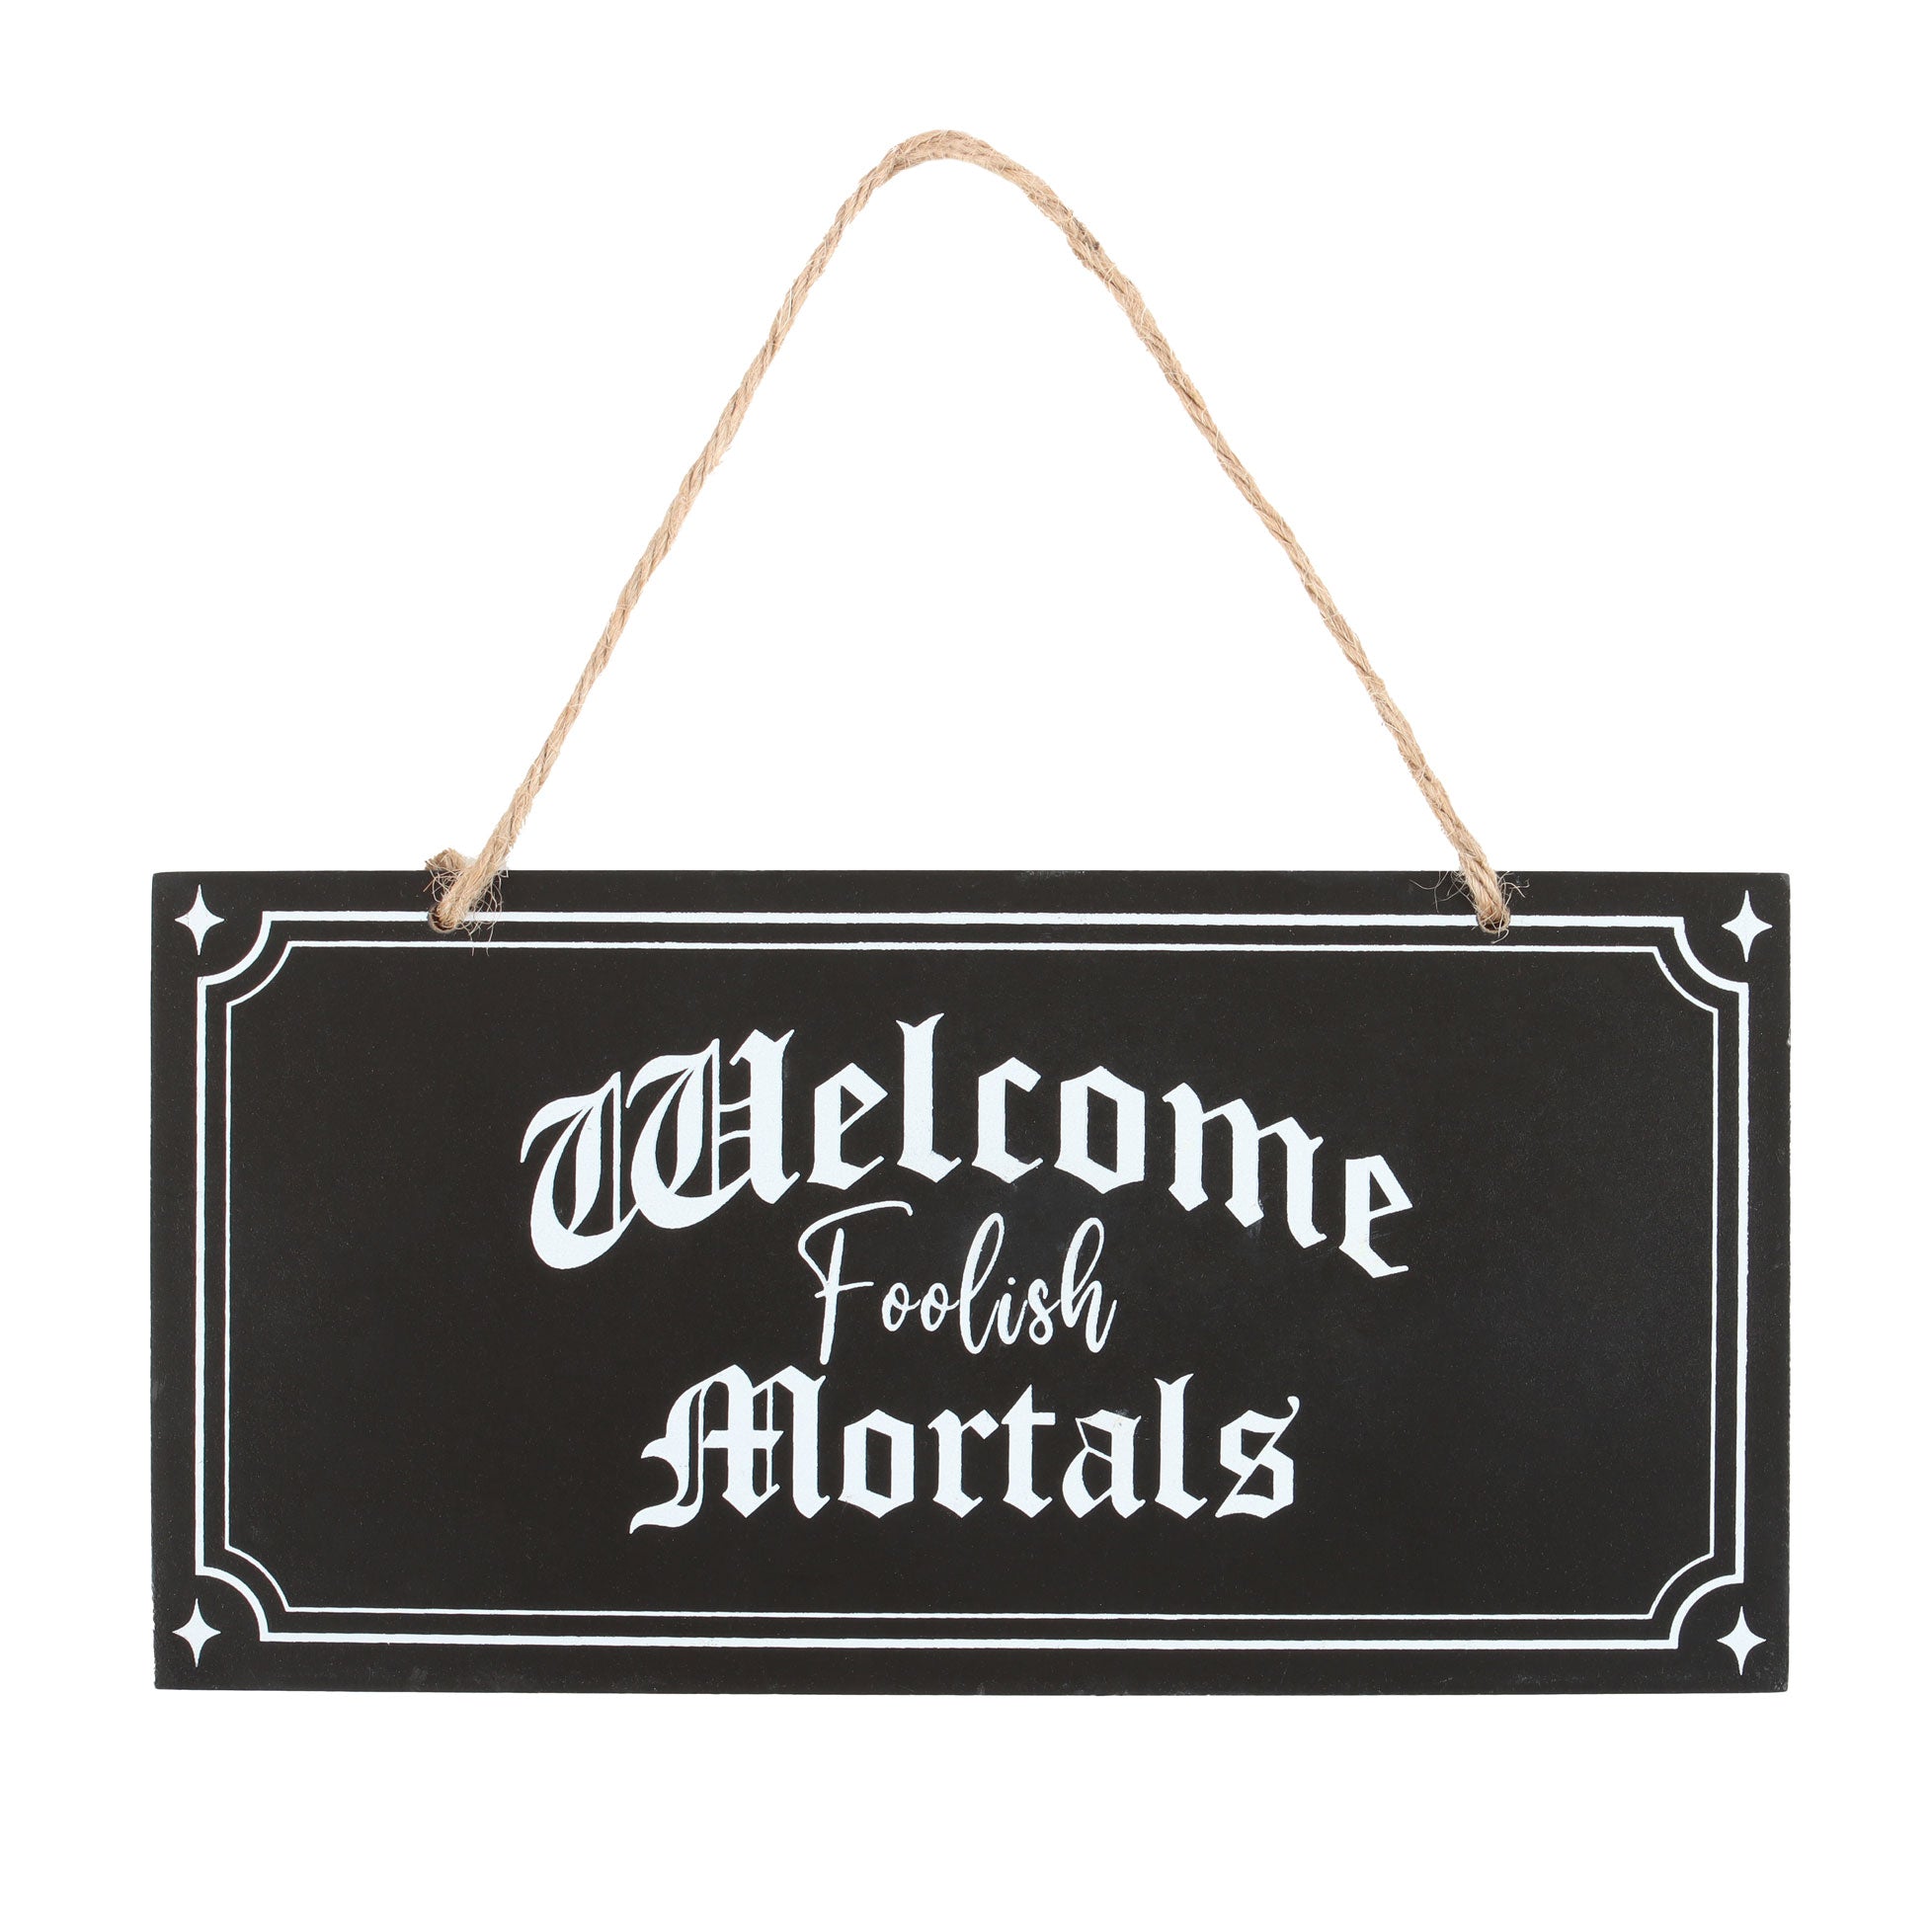 View Welcome Foolish Mortals Hanging Sign information